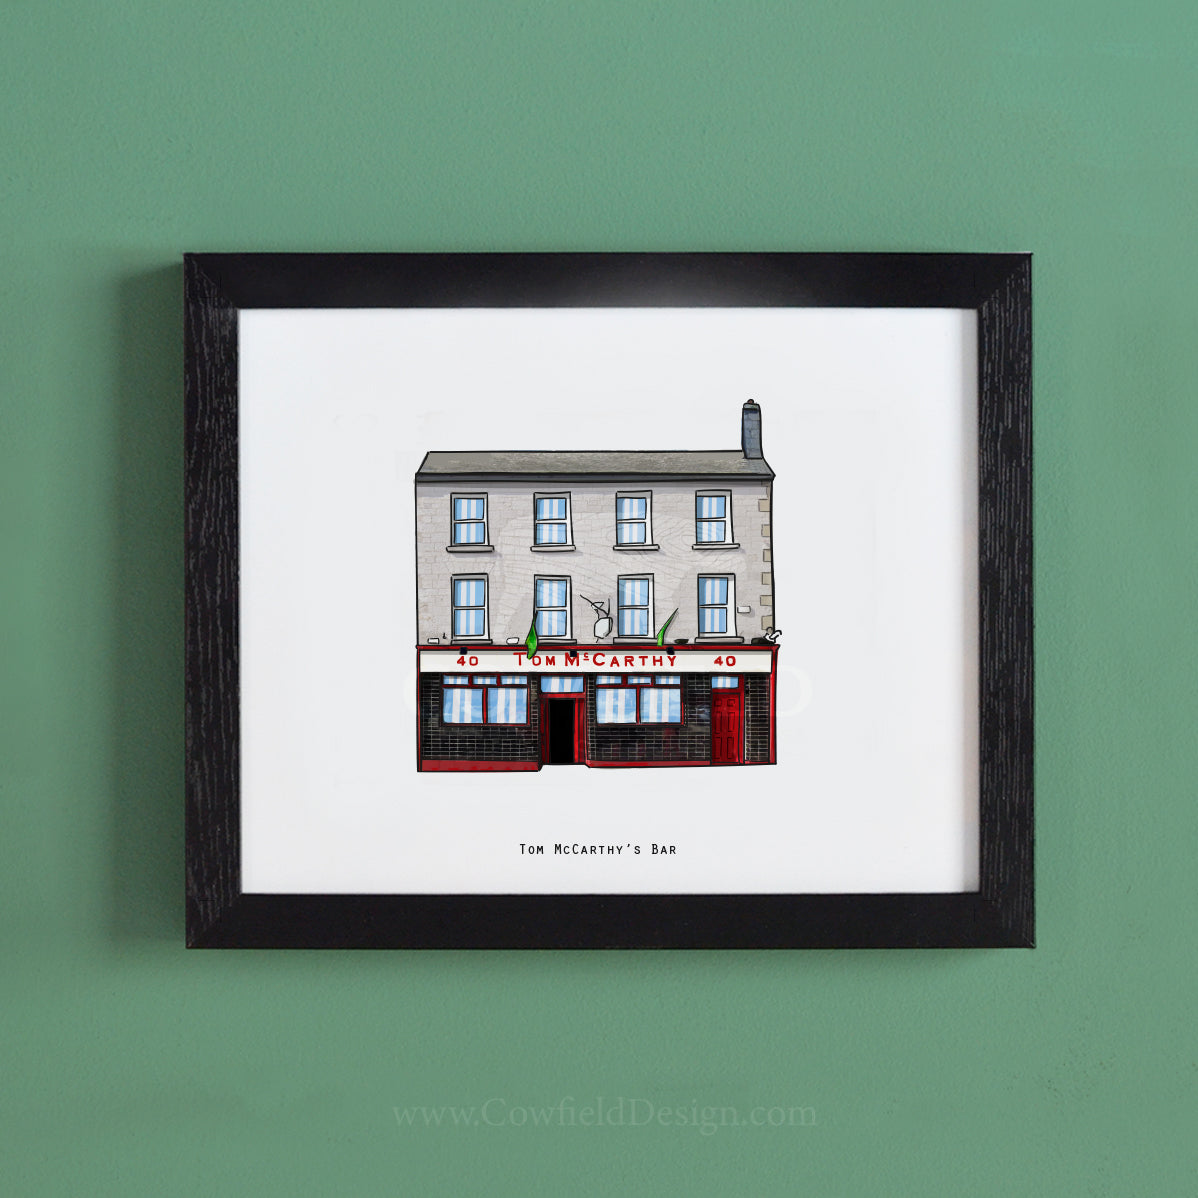 Tom McCarthy's Bar Illustrated Pubs of Kerry